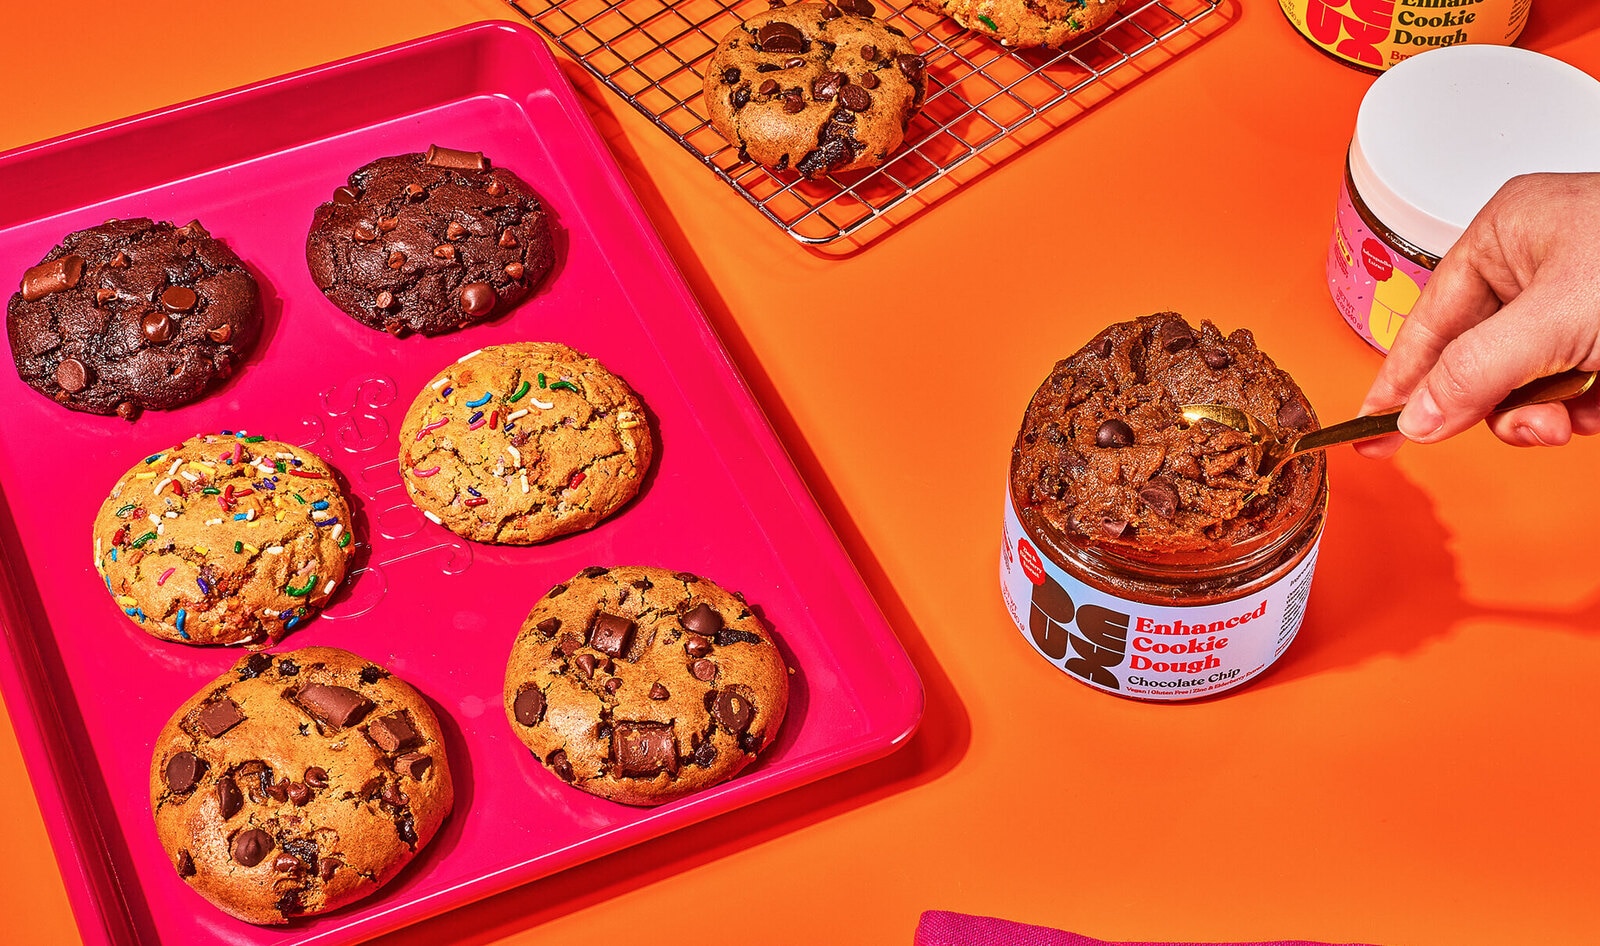 The Vegan Cookie Dough Celebrities Like Kristin Cavallari and Karlie Kloss Can't Get Enough Of<br>